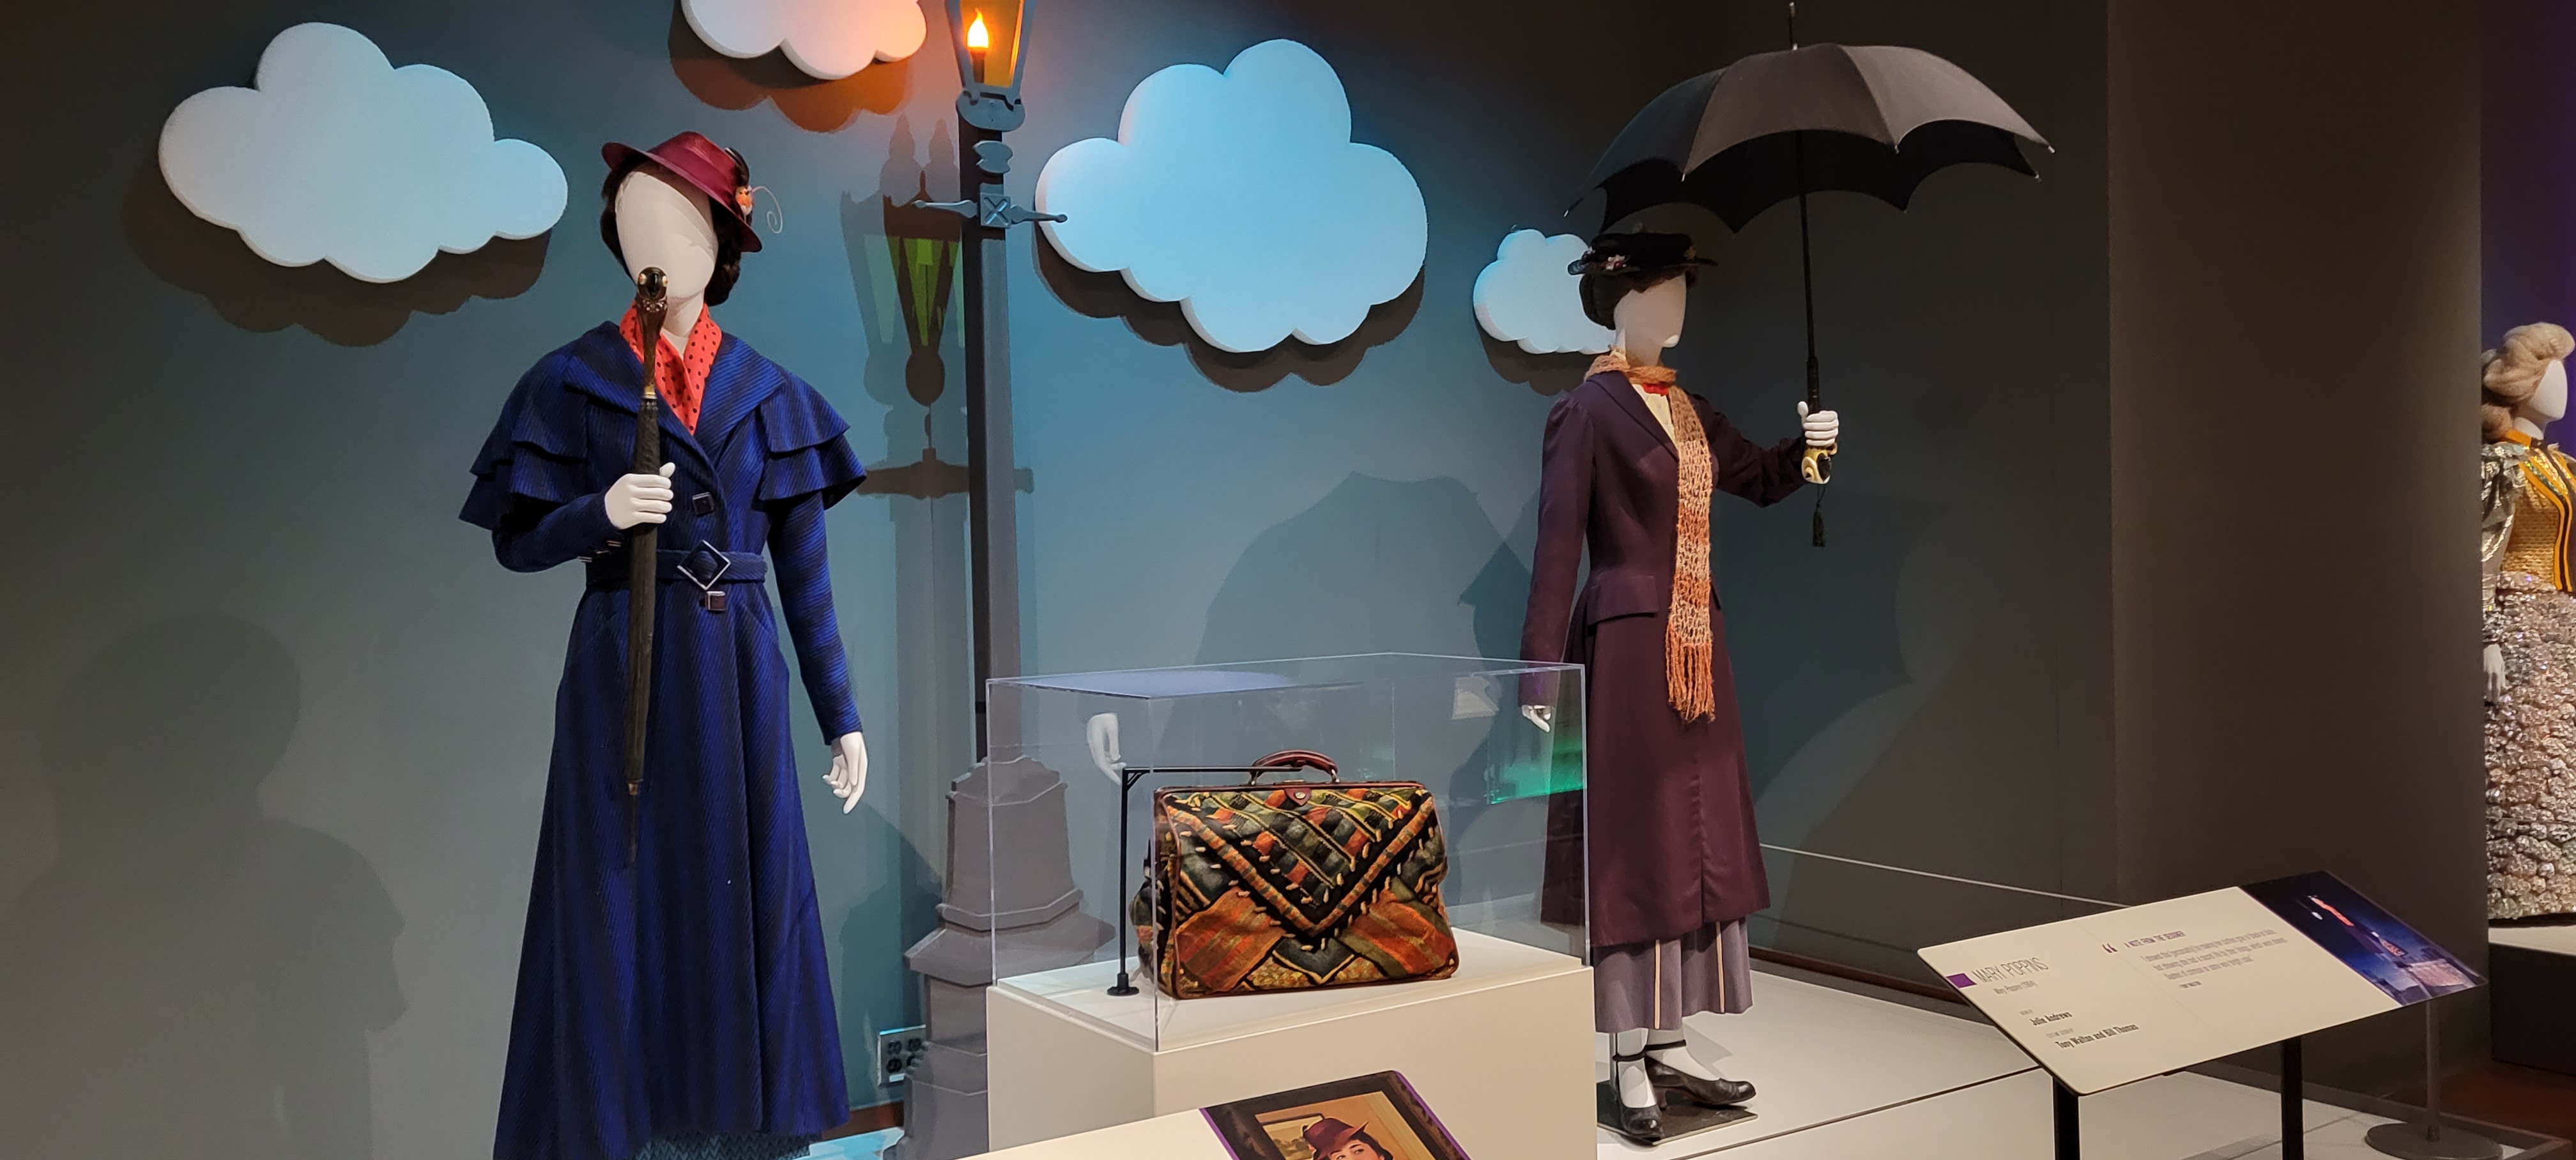 Costumes worn by Julie Andrews in 1964 "Mary Poppins" courtesy The Walt Disney Company